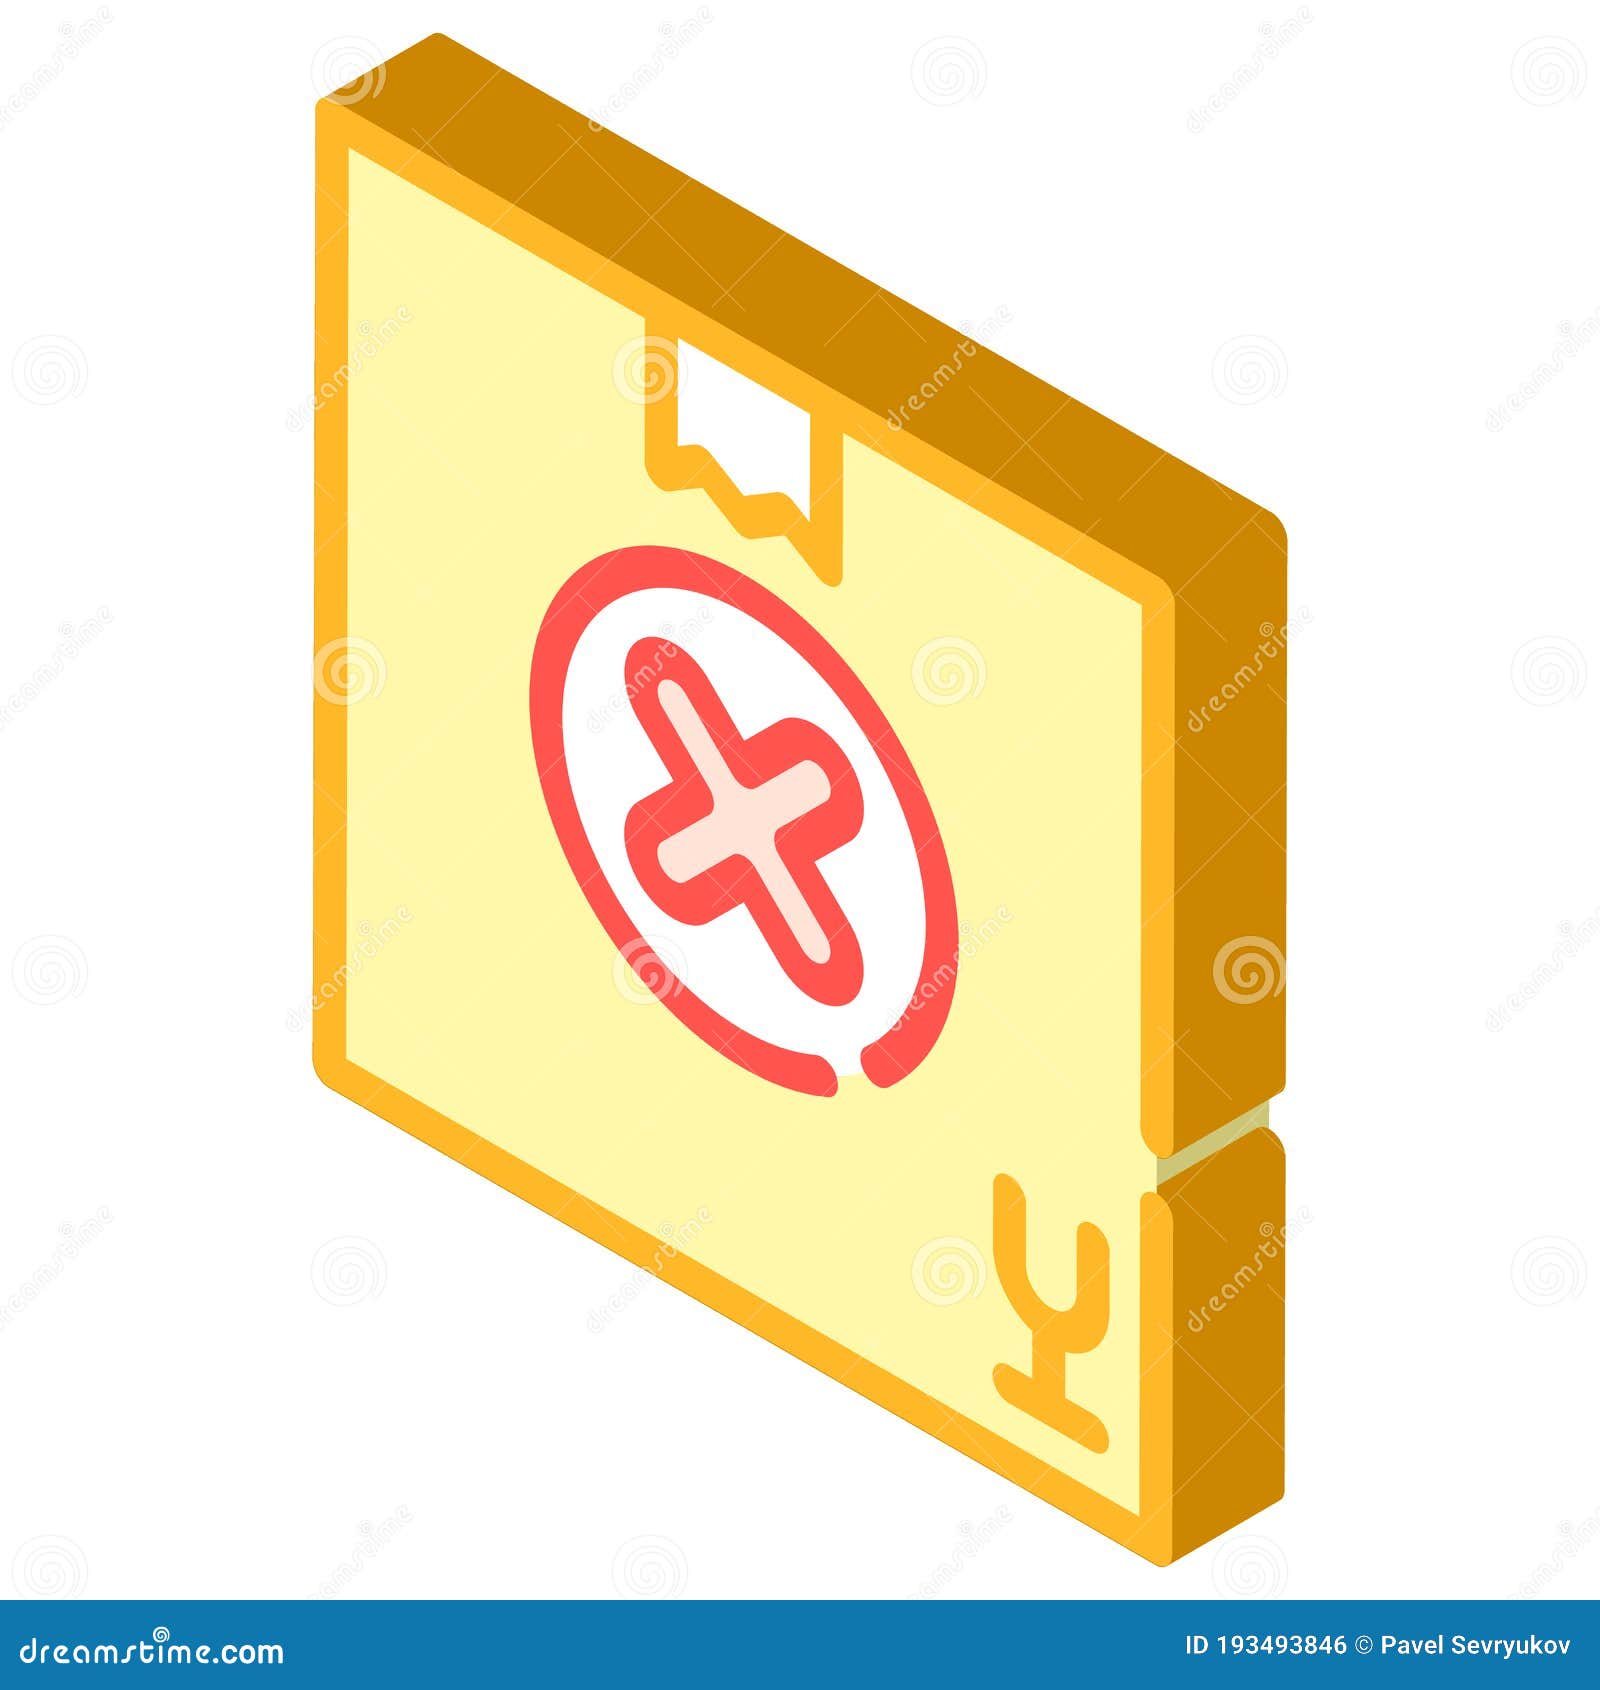 undelivered package box isometric icon  